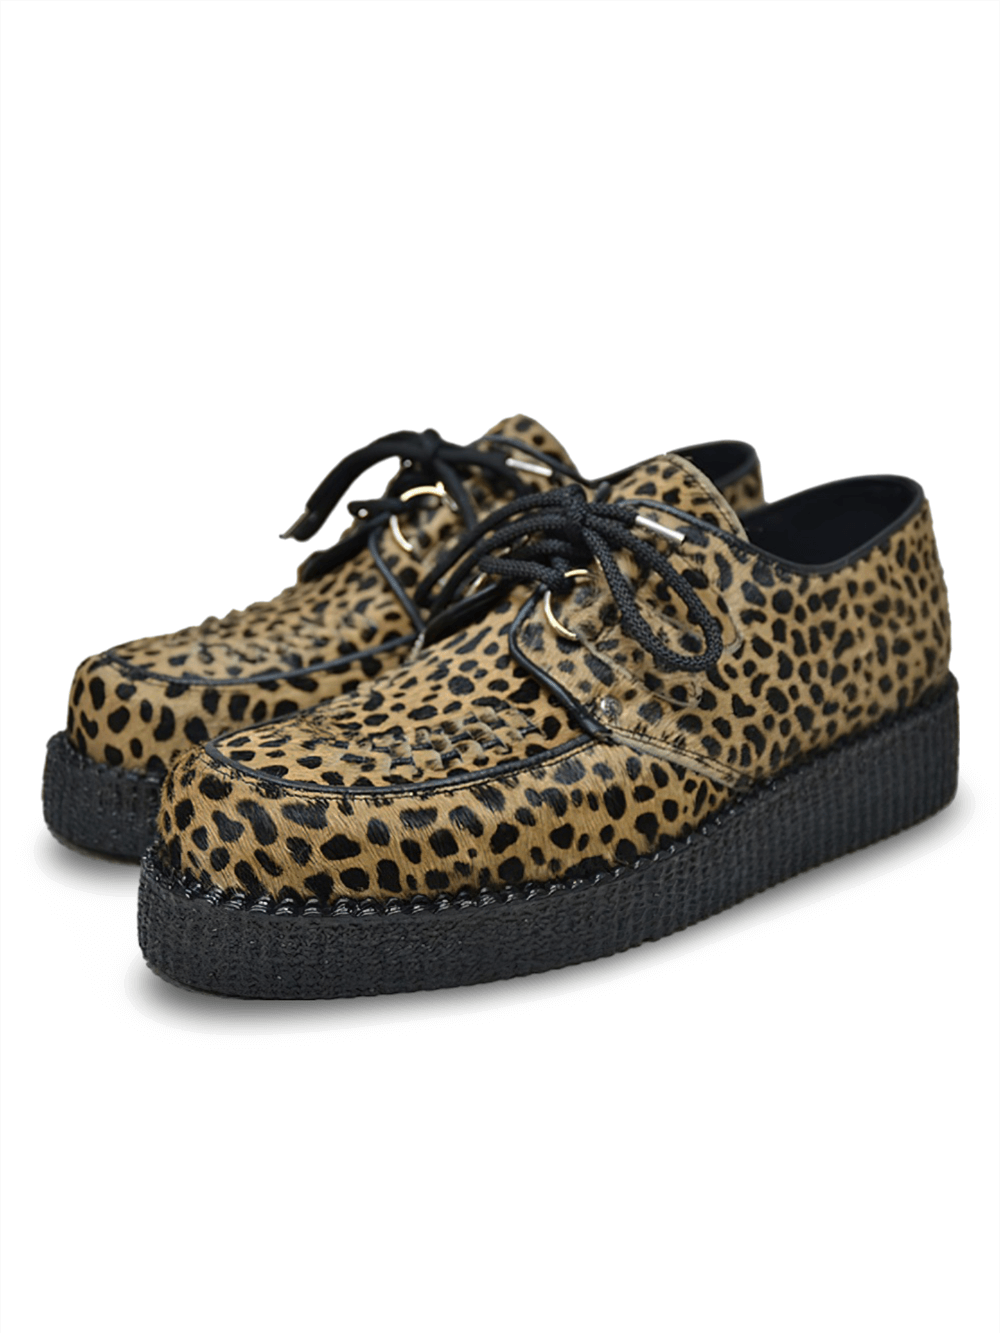 Stylish Unisex Leopard Print Creepers with Lace-Up